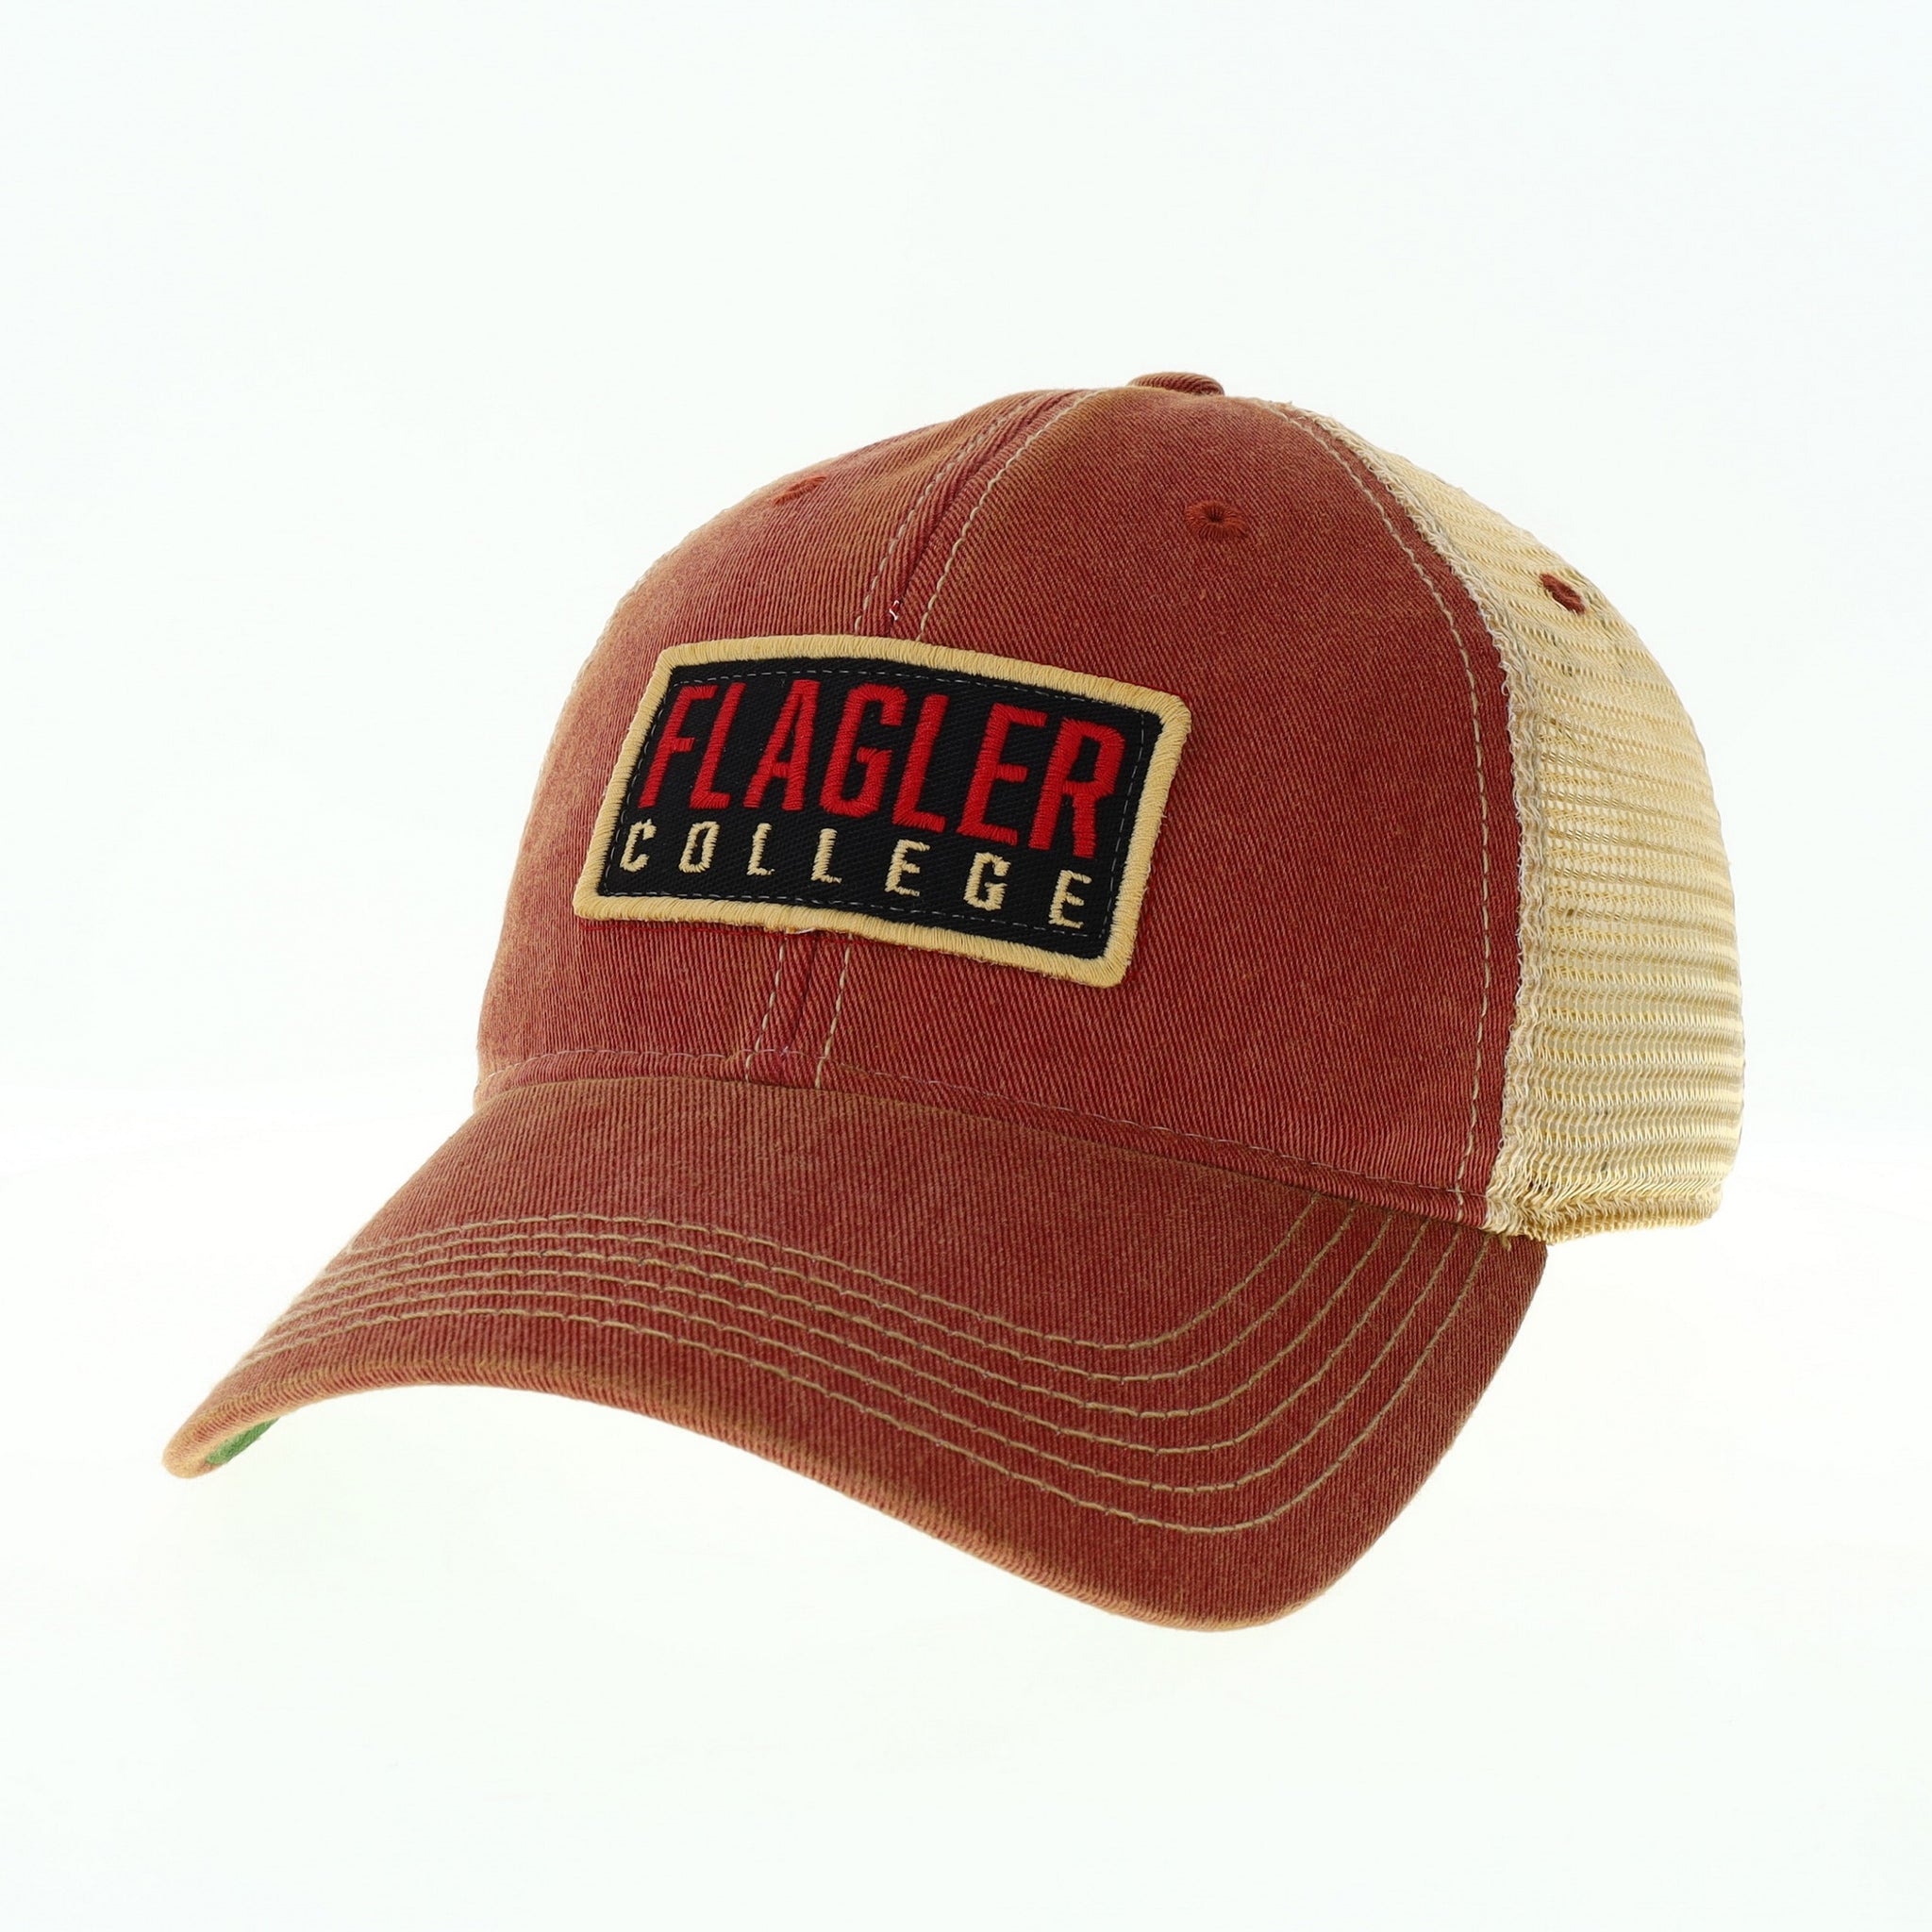 light crimson hat with beige mesh back and black patch with red letters saying Flagler over beige letters saying college